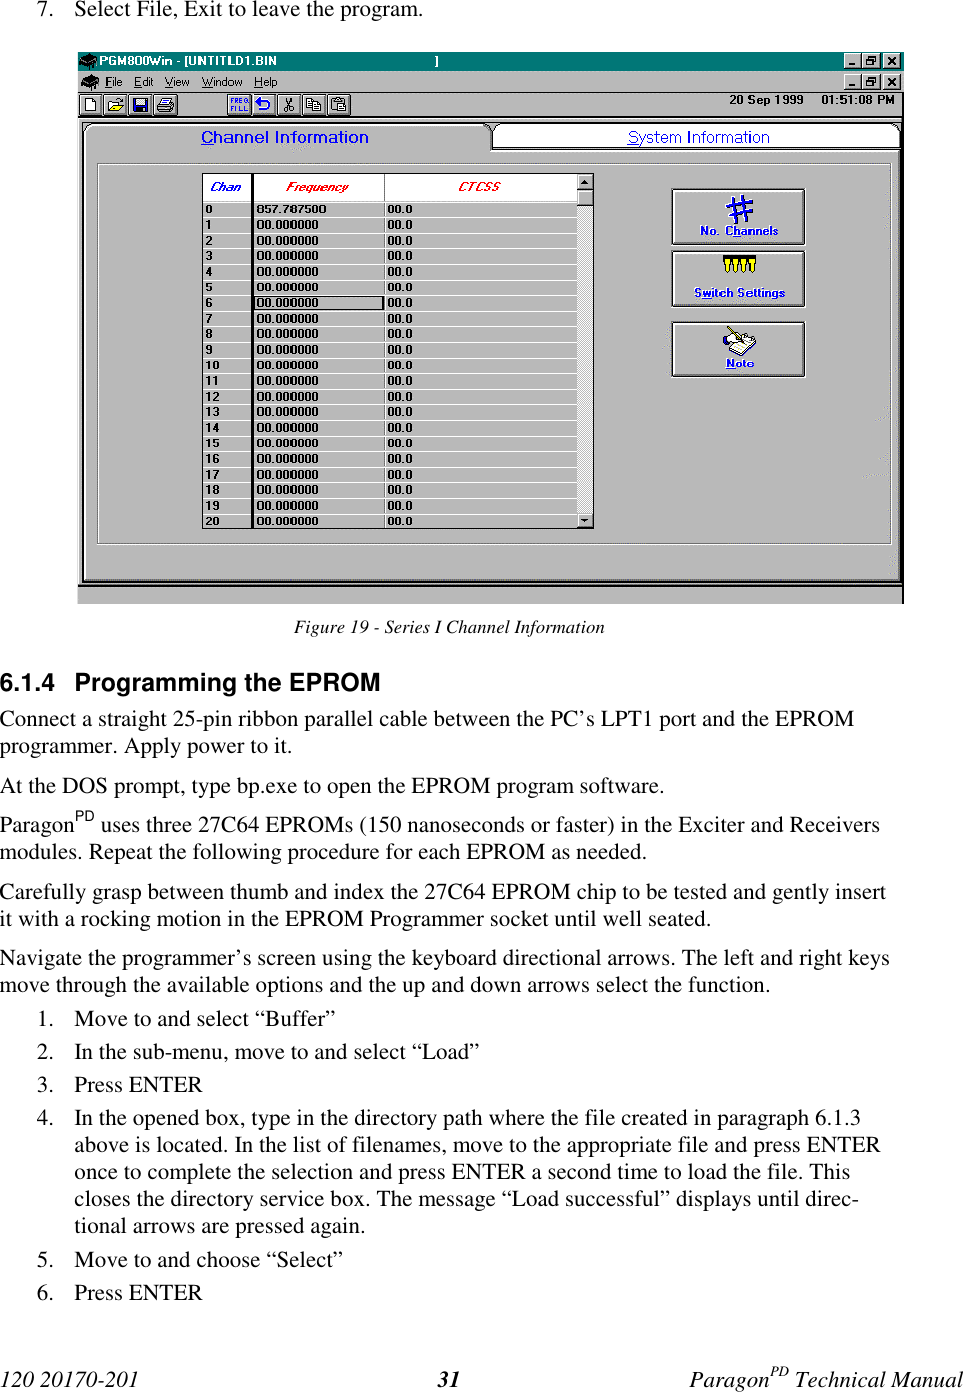 120 20170-201 ParagonPD Technical Manual317. Select File, Exit to leave the program.Figure 19 - Series I Channel Information6.1.4  Programming the EPROMConnect a straight 25-pin ribbon parallel cable between the PC’s LPT1 port and the EPROMprogrammer. Apply power to it.At the DOS prompt, type bp.exe to open the EPROM program software.ParagonPD uses three 27C64 EPROMs (150 nanoseconds or faster) in the Exciter and Receiversmodules. Repeat the following procedure for each EPROM as needed.Carefully grasp between thumb and index the 27C64 EPROM chip to be tested and gently insertit with a rocking motion in the EPROM Programmer socket until well seated.Navigate the programmer’s screen using the keyboard directional arrows. The left and right keysmove through the available options and the up and down arrows select the function.1. Move to and select “Buffer”2. In the sub-menu, move to and select “Load”3. Press ENTER4. In the opened box, type in the directory path where the file created in paragraph 6.1.3above is located. In the list of filenames, move to the appropriate file and press ENTERonce to complete the selection and press ENTER a second time to load the file. Thiscloses the directory service box. The message “Load successful” displays until direc-tional arrows are pressed again.5. Move to and choose “Select”6. Press ENTER